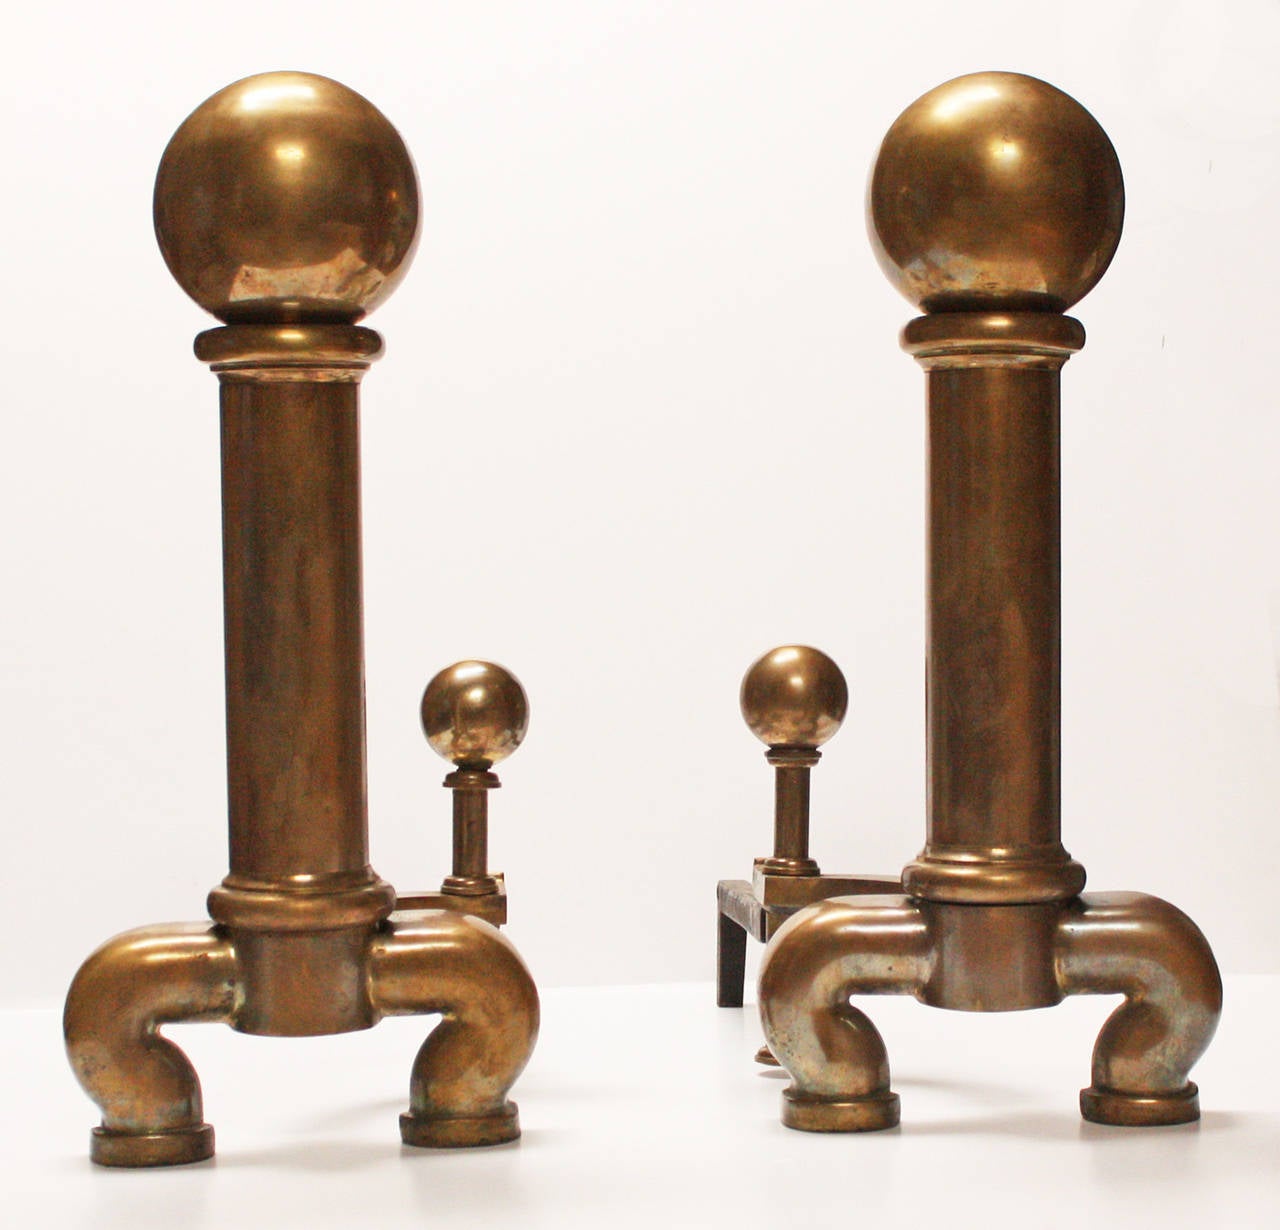 Late 19th century revival cannonball brass andirons.